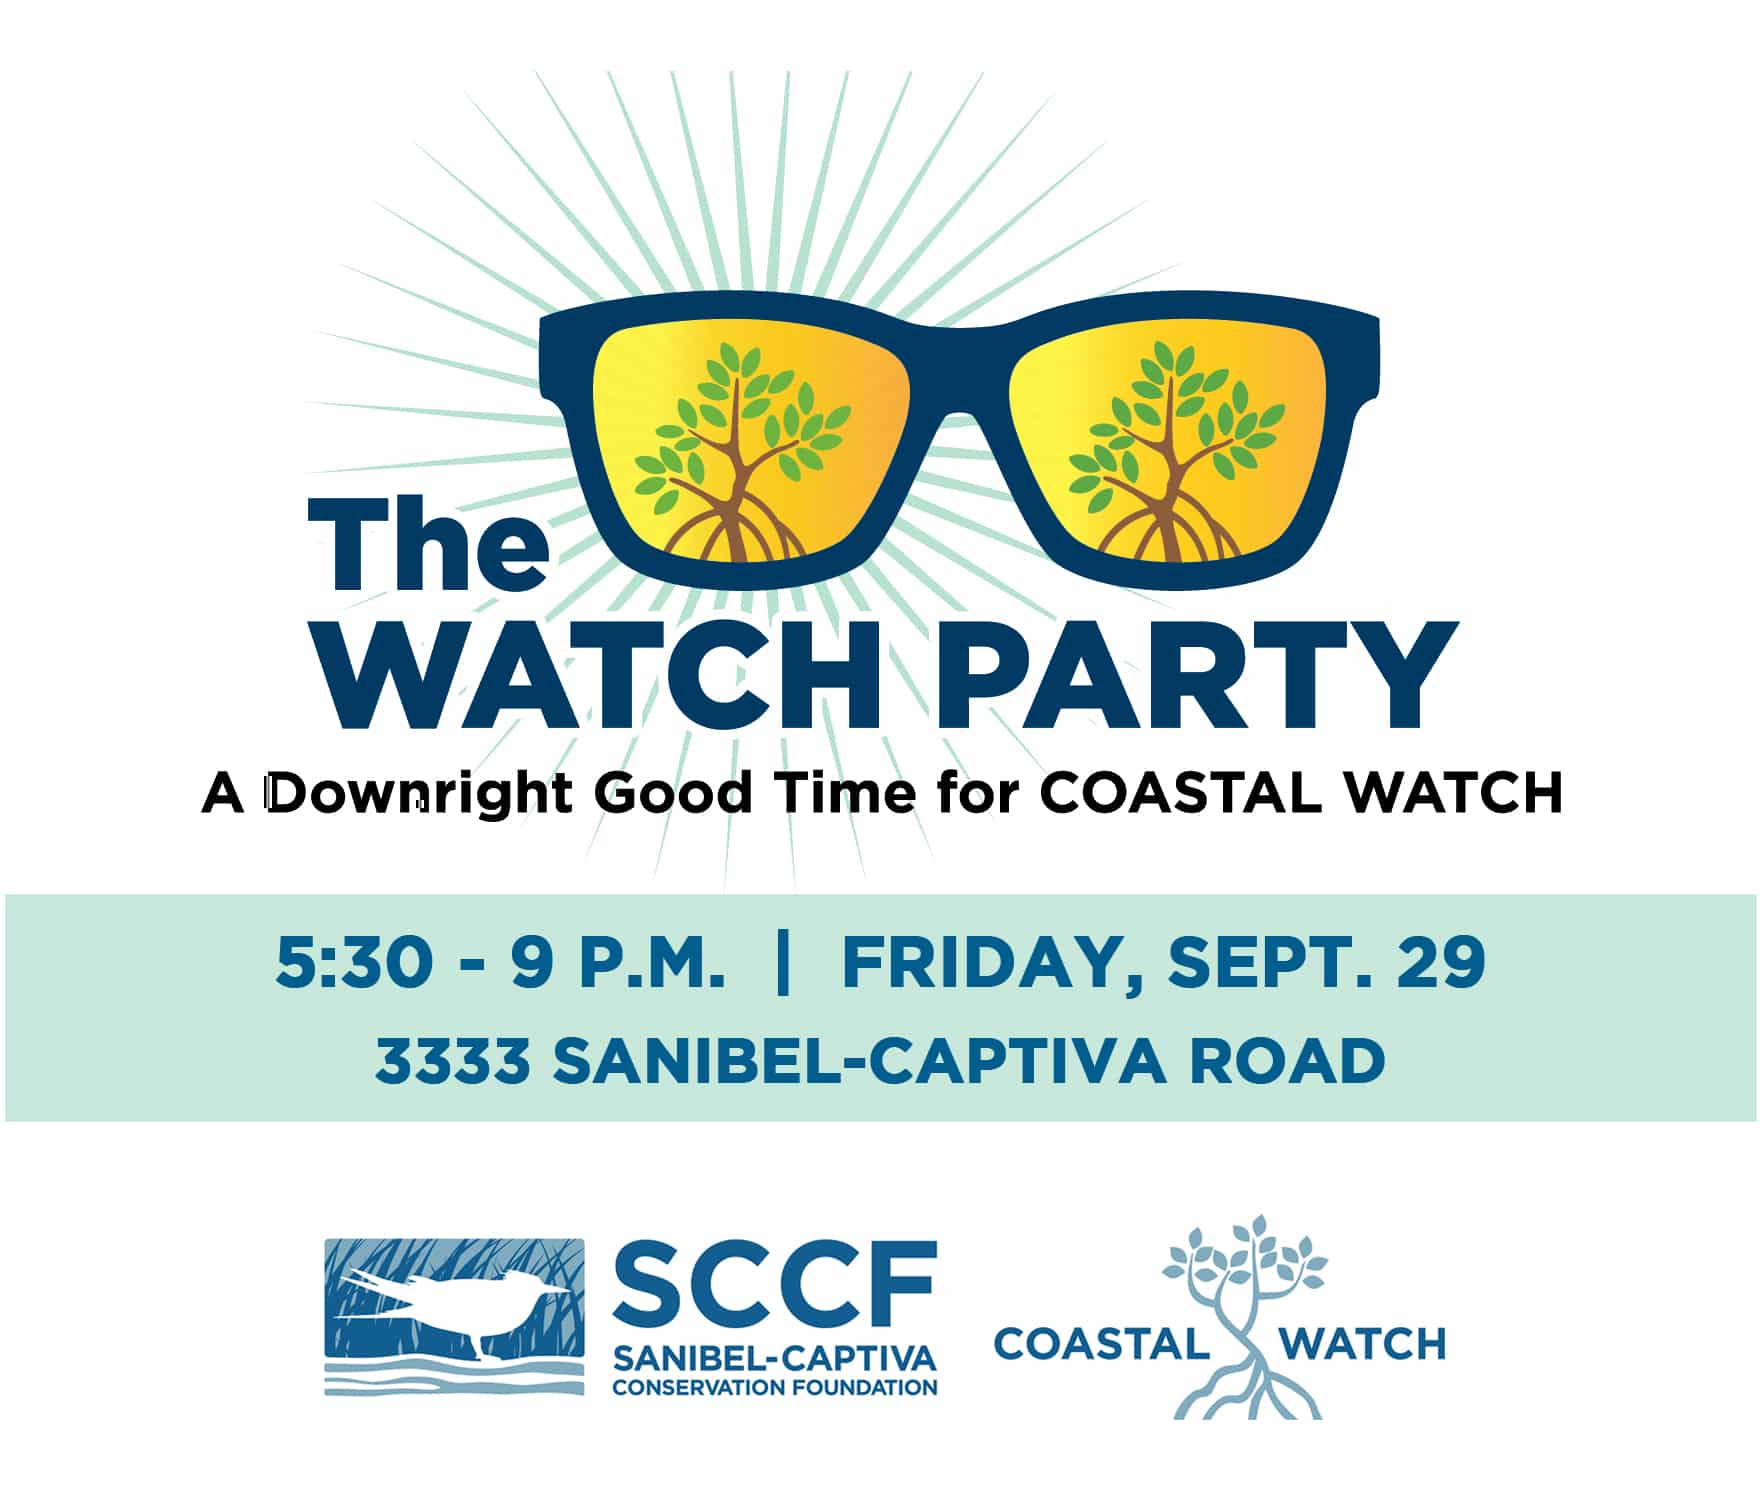 the watch party 5:30-9 p.m. Friday Sept. 29, 3333 Sanibel-Captiva Road